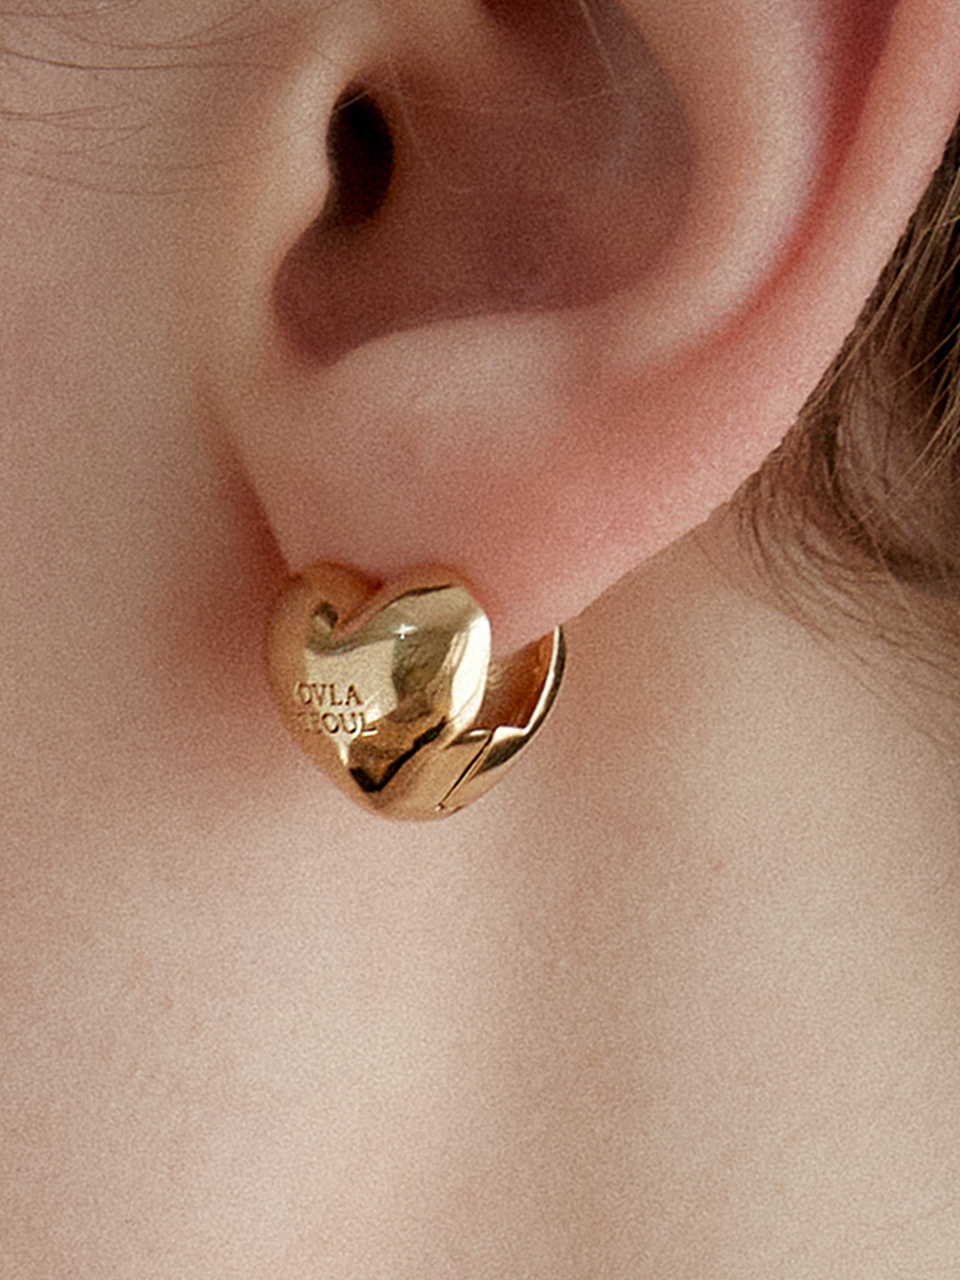 CLASSIC HEART TOUCHABLE EARRING_M